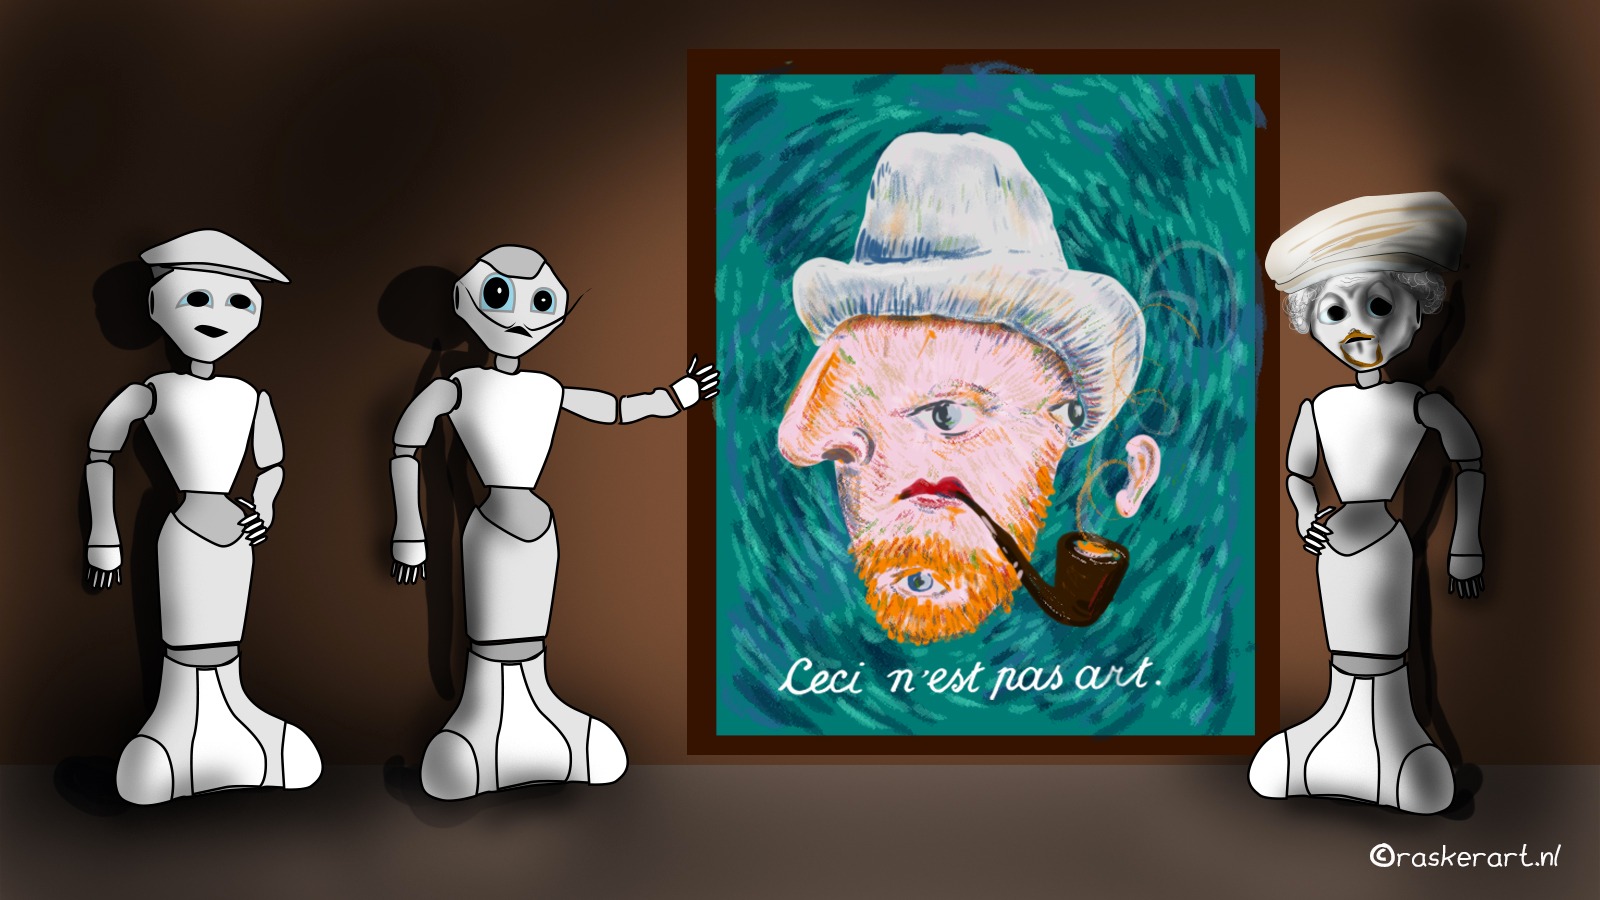 What if artificial intelligence decides what art is - and what not?